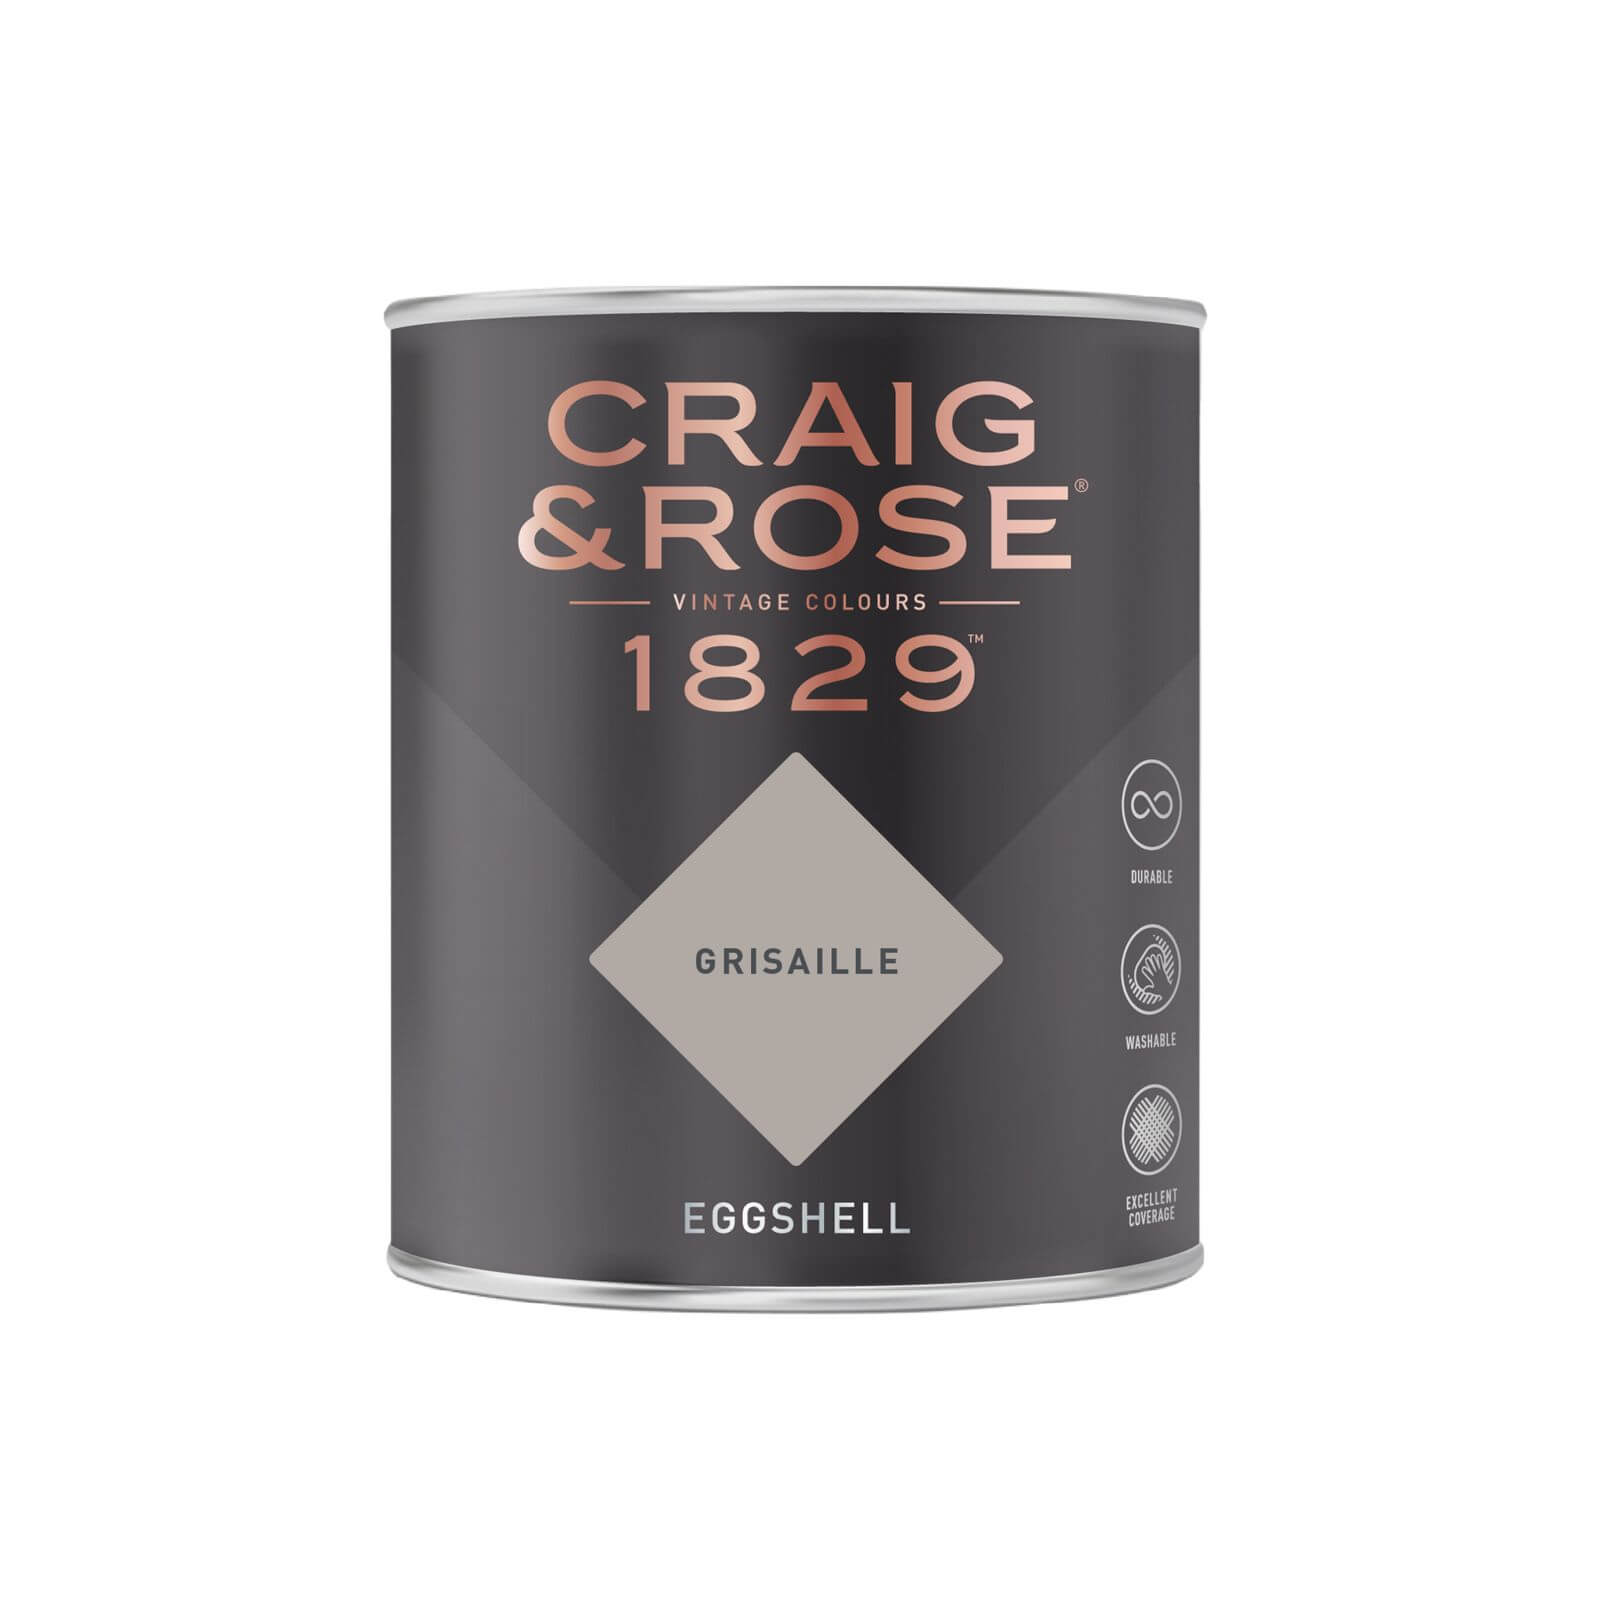 Craig & Rose 1829 Eggshell Paint Grisaille - 750ml